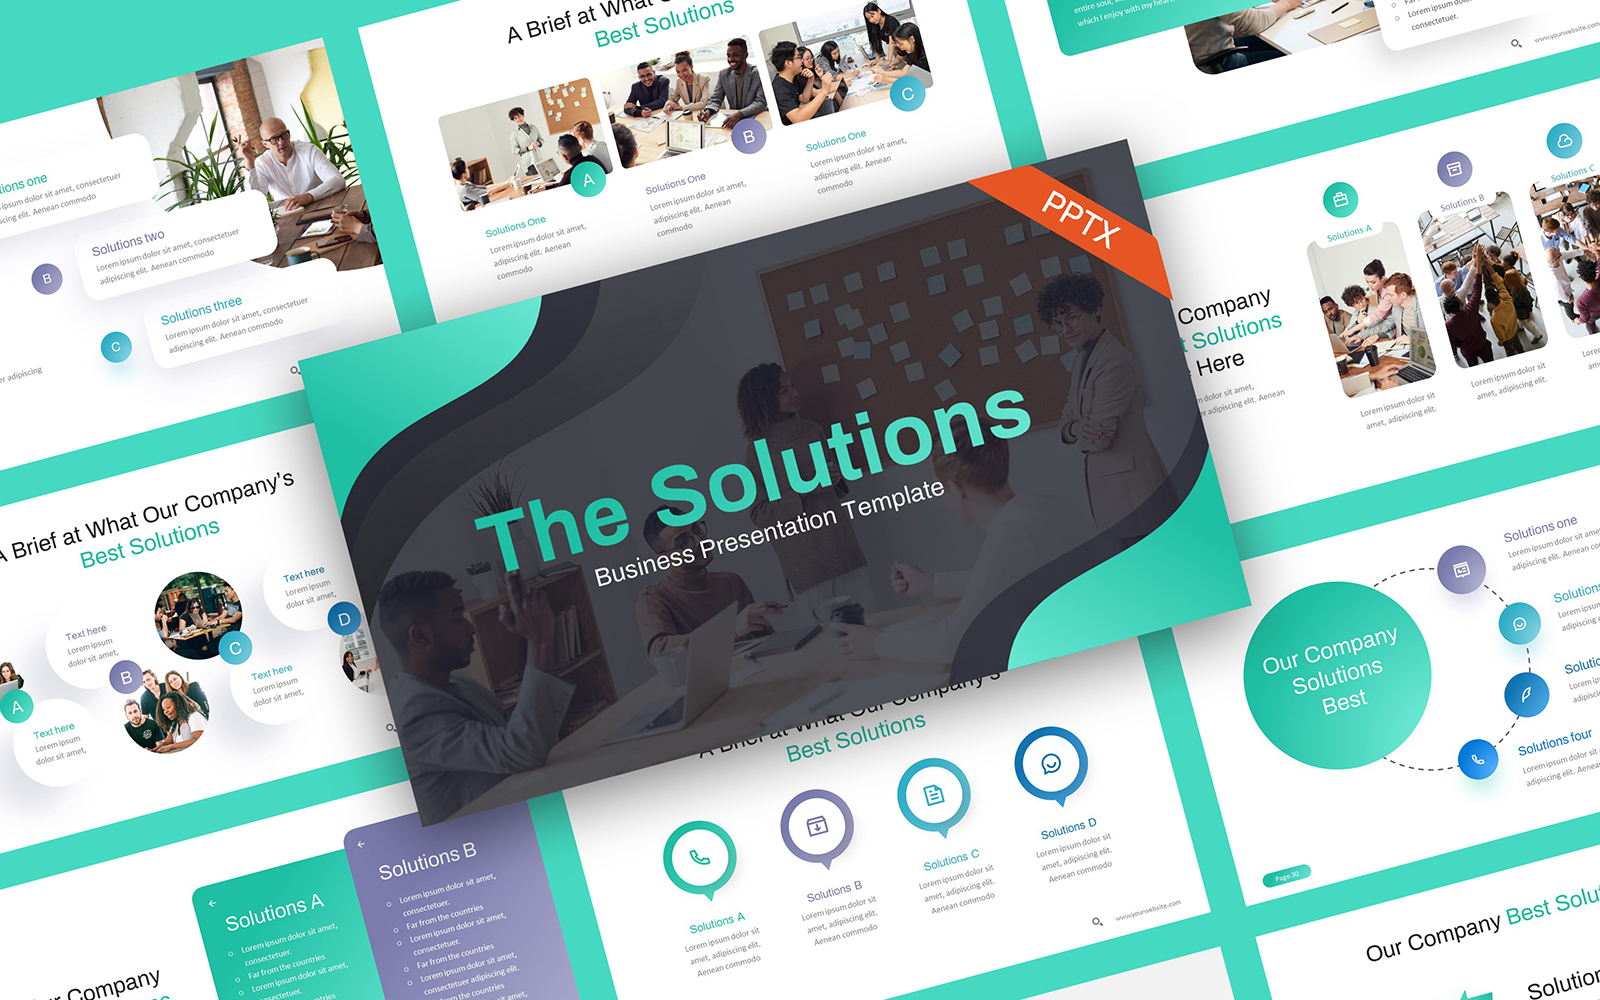 The Solutions Infographic PowerPoint Template